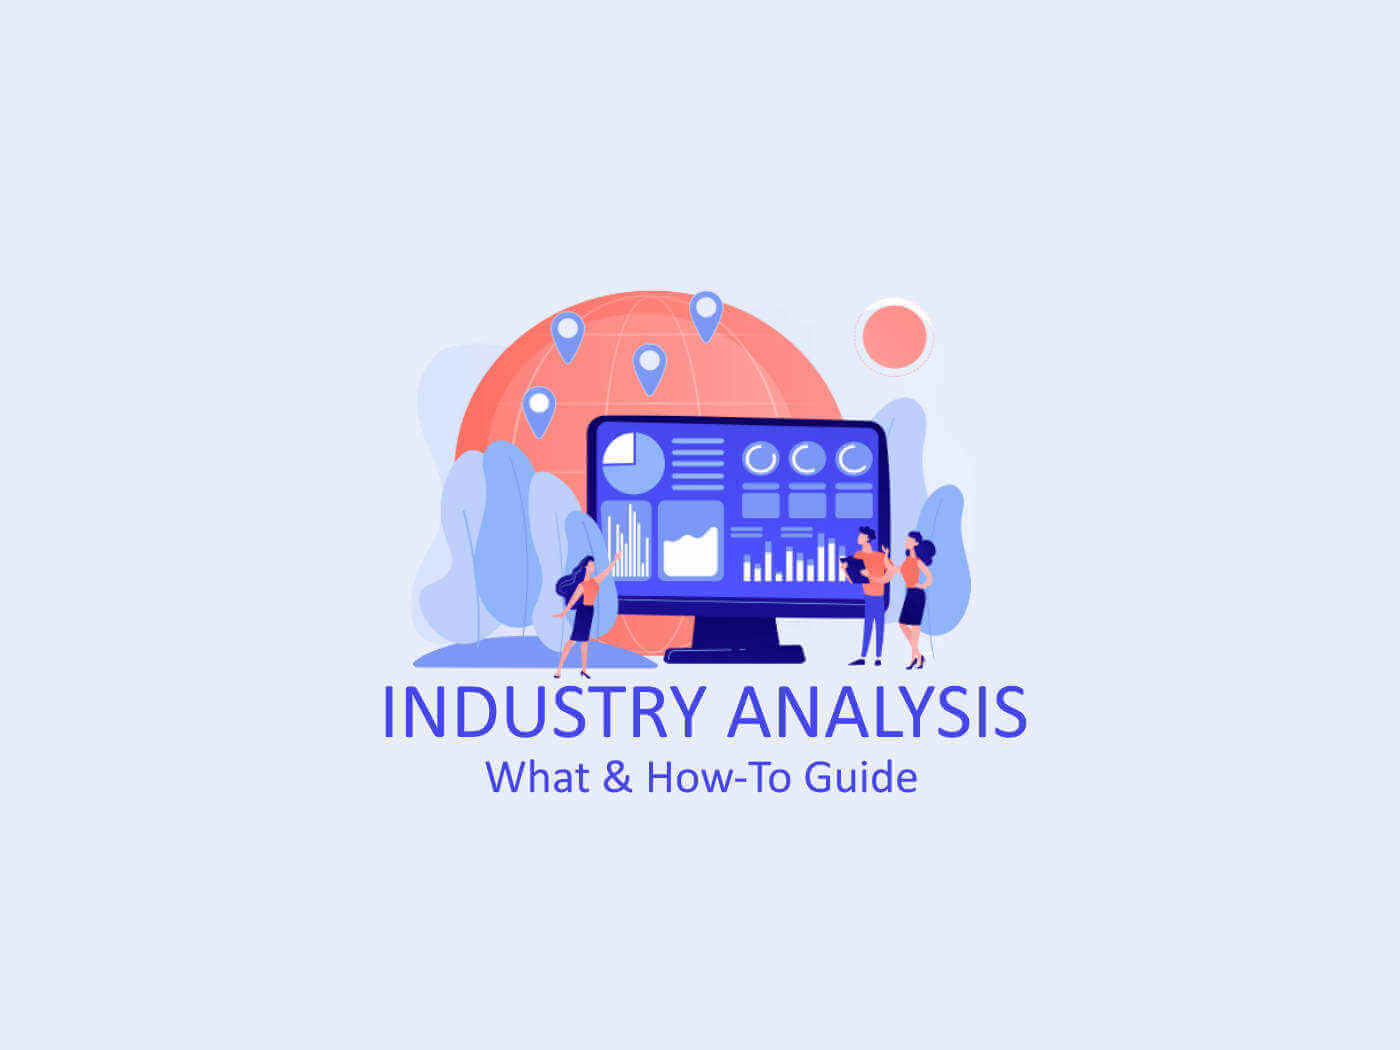 Industry Analysis - Top 3 Methods to Assess and Analyze an Industry